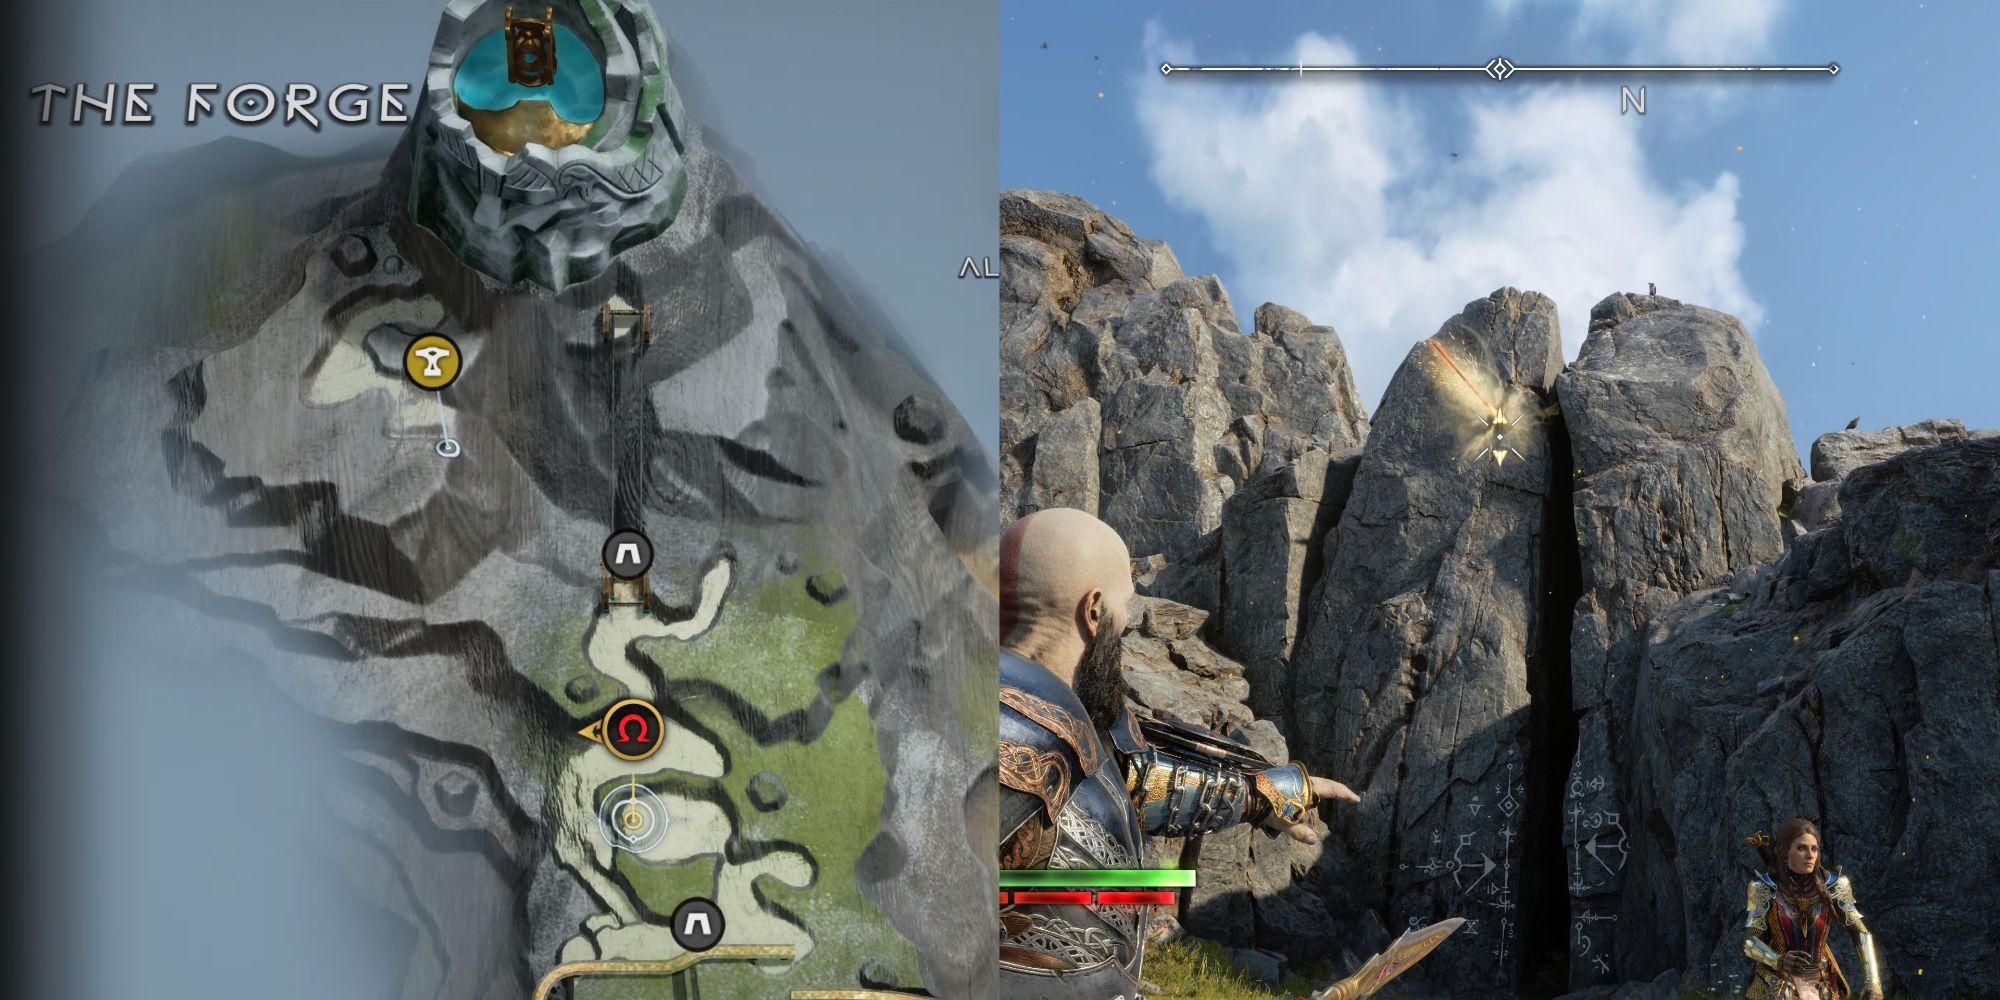 Kratos looks at the places to throw your Spear in Svartalfheim, The Forge, to get to the second Yggdrasil Rift location.